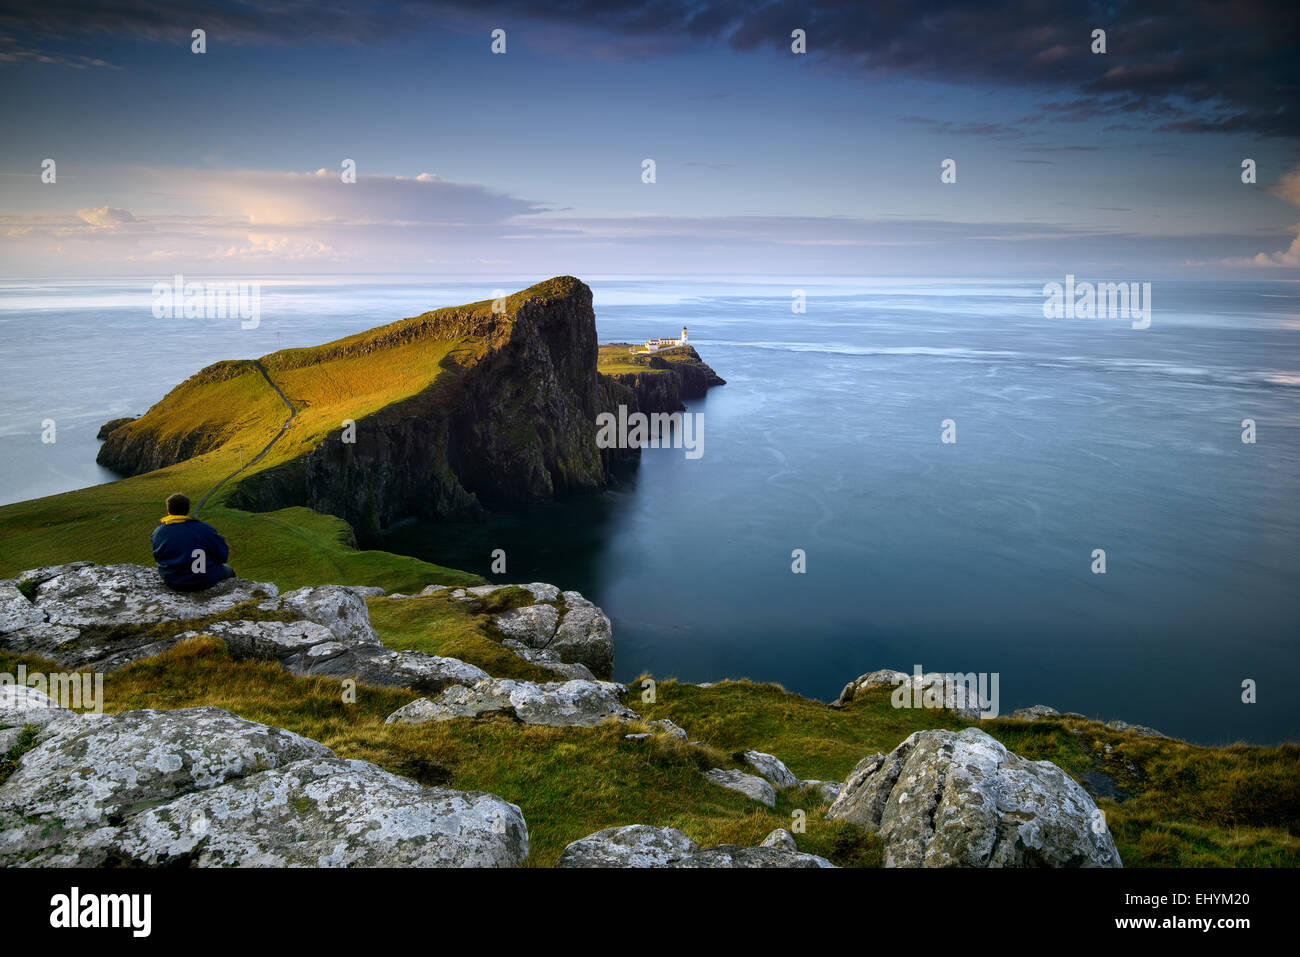 Mid adult man sitting on a rock looking out to sea at Neist Point, Scotland Stock Photo